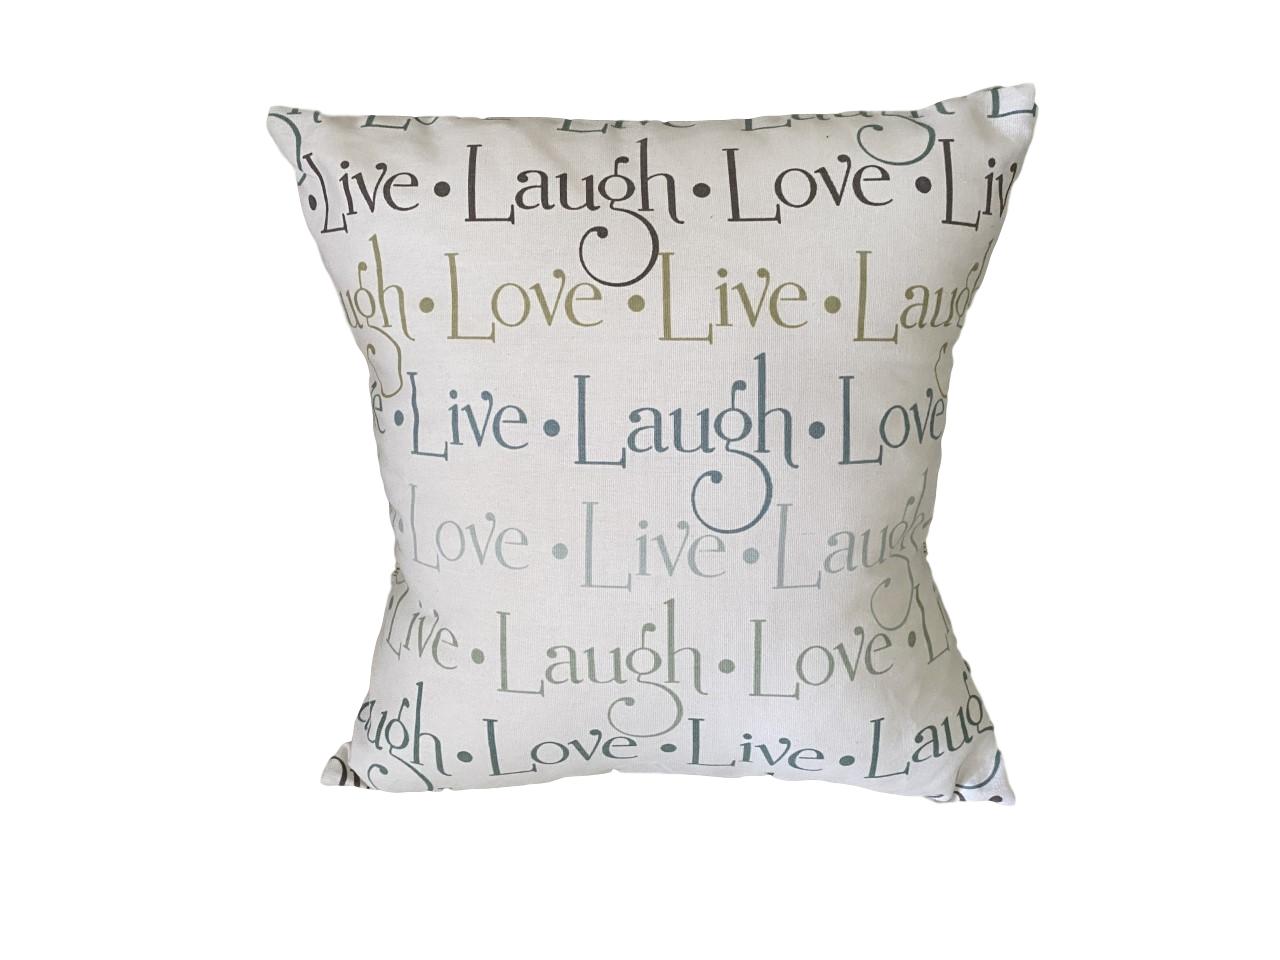 16 Home Decor Pillow kit (INSERT NOT INCLUDED, MUST BE PURCHASED